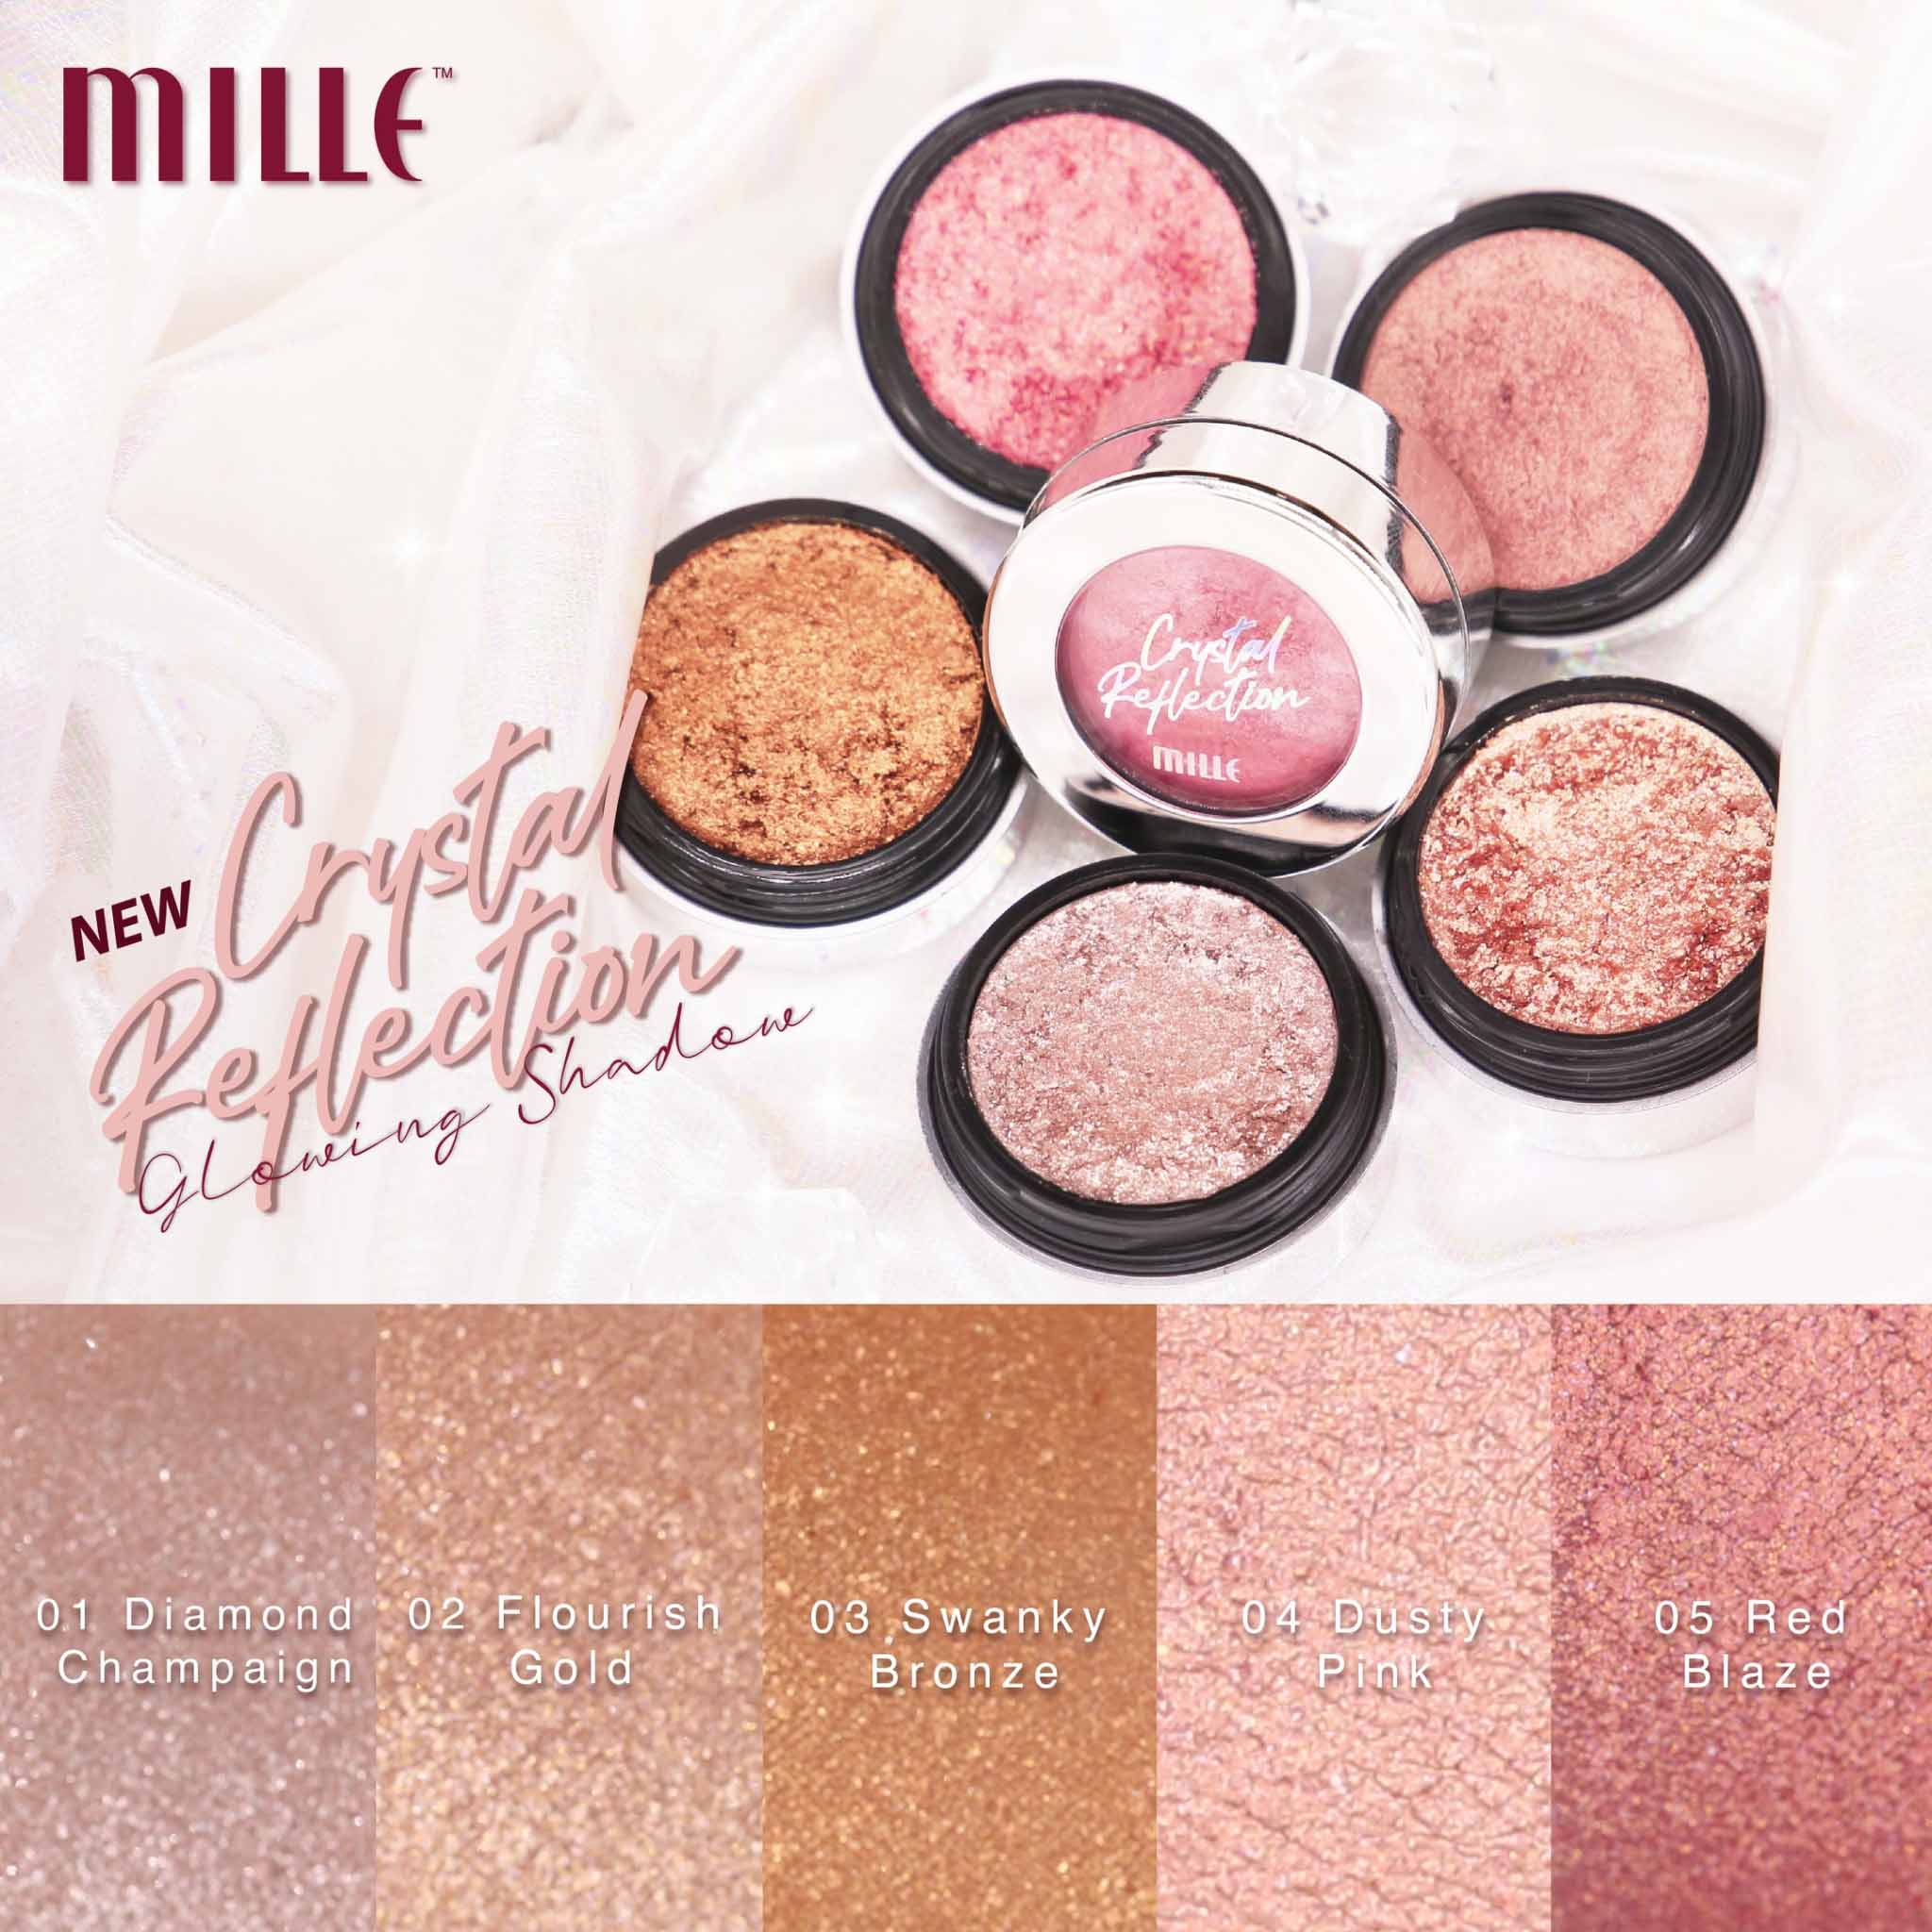 Mille, Mille รีวิว, Mille ราคา, Mille Crystal Reflection Glowing Shadow, Mille Crystal Reflection Glowing Shadow รีวิว, Mille Crystal Reflection Glowing Shadow ราคา, Crystal Reflection Glowing Shadow, Mille Crystal Reflection Glowing Shadow 1.7g, Mille Crystal Reflection Glowing Shadow #05 Red Blaze, คริสตัลชาโดว์, อายแชโดว์, อายแชโดว์ คือ, วิธีทาอายแชโดว์ เกาหลี